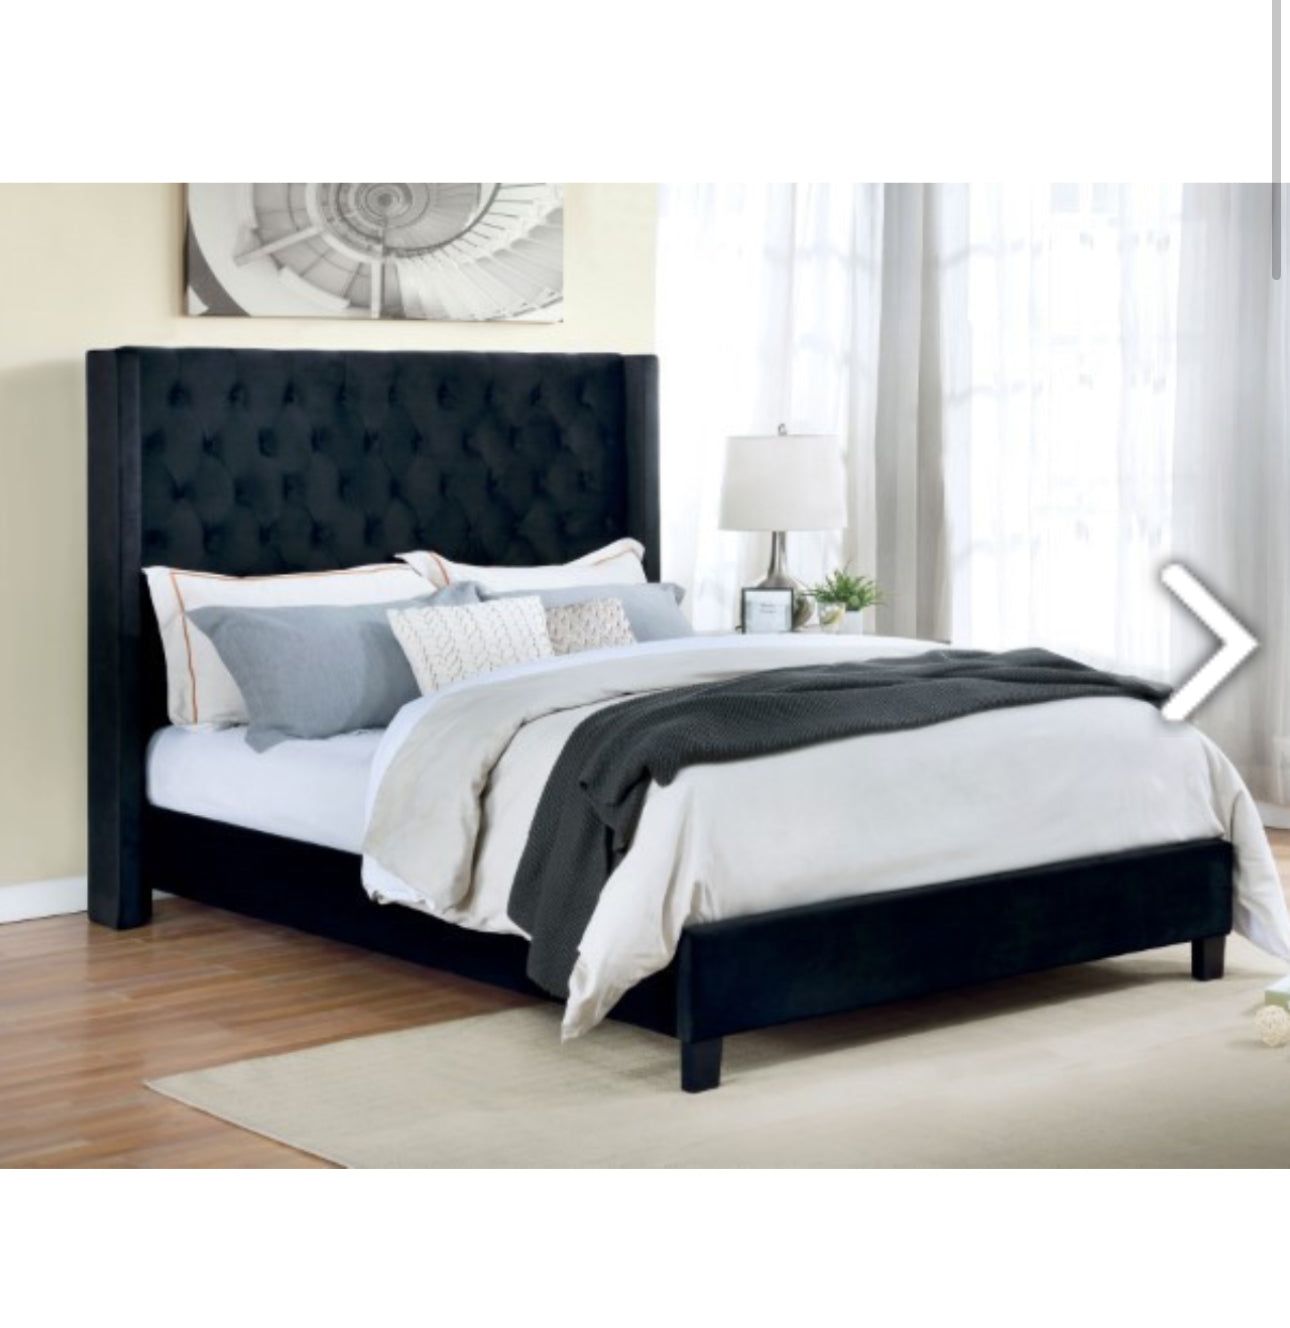 KING OR QUEEN BED FRAME